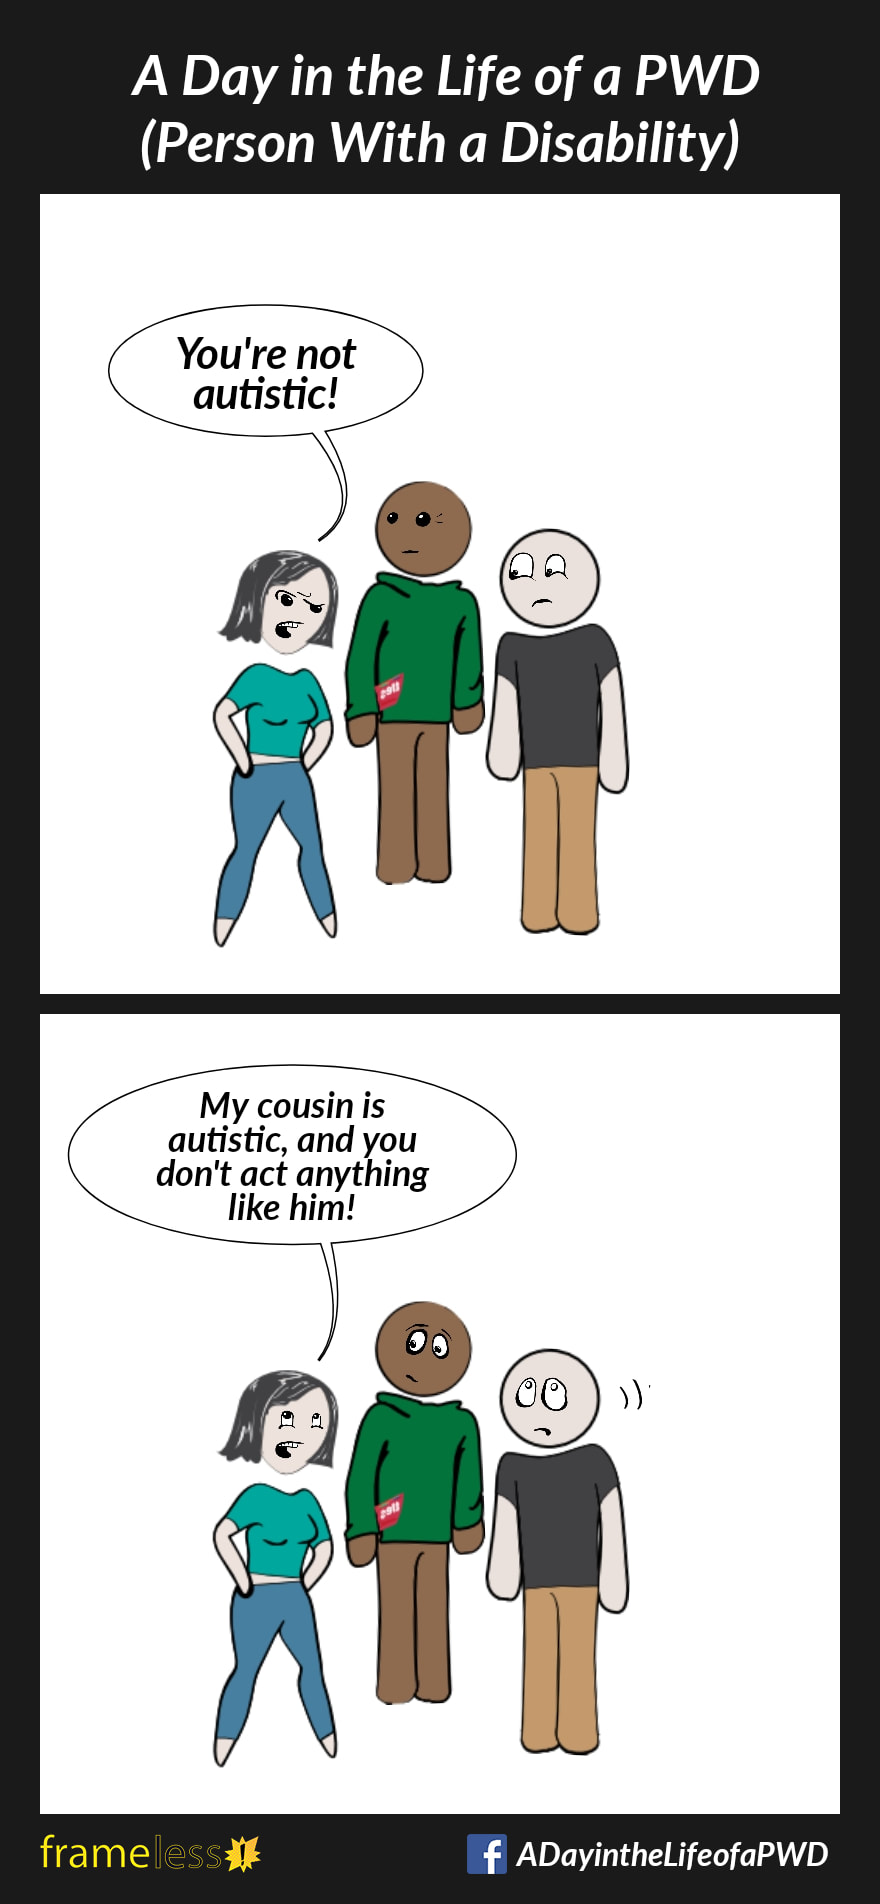 COMIC STRIP 
A Day in the Life of a PWD (Person With a Disability) 

Frame 1:
A woman is talking with a man and his friend.
WOMAN (judgemental): You're not autistic!

Frame 2:
WOMAN: My cousin is autistic and you don't act anything like him!
Stunned, the man rolls his eyes.